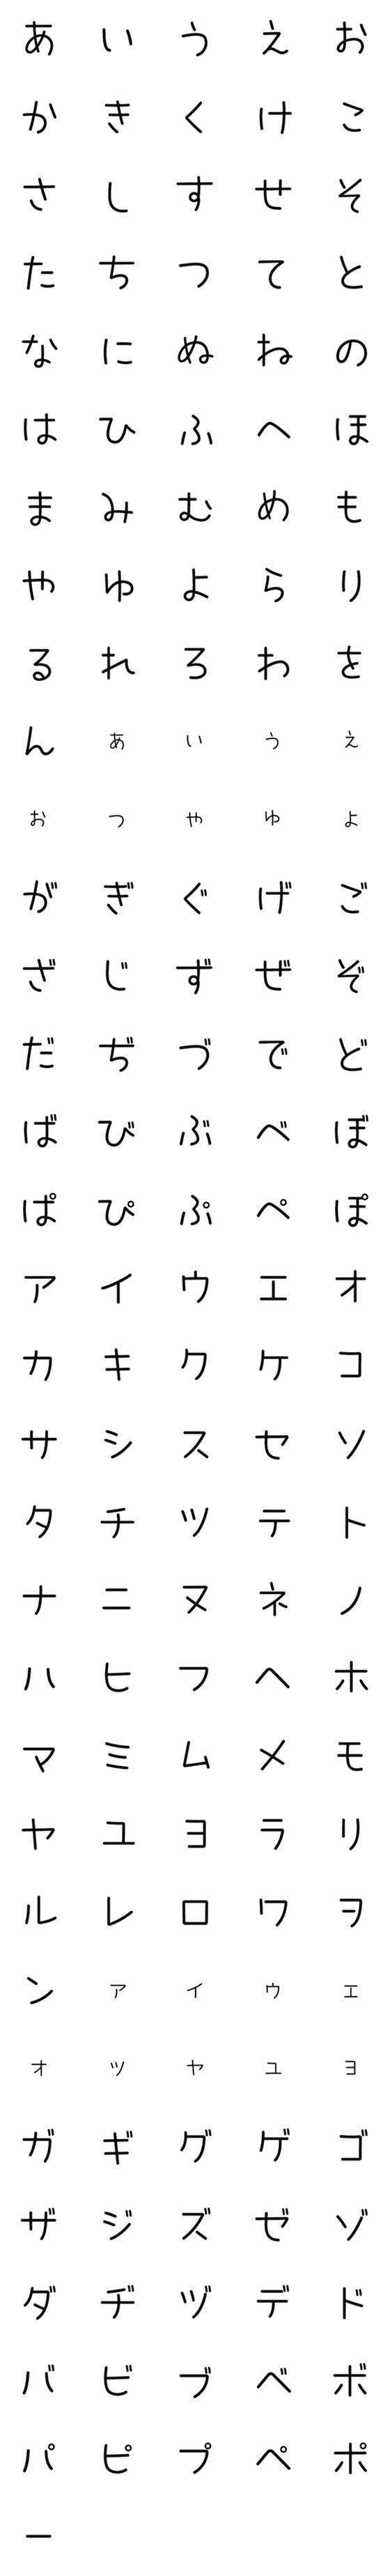 [LINE絵文字]くせなし デコ文字の画像一覧